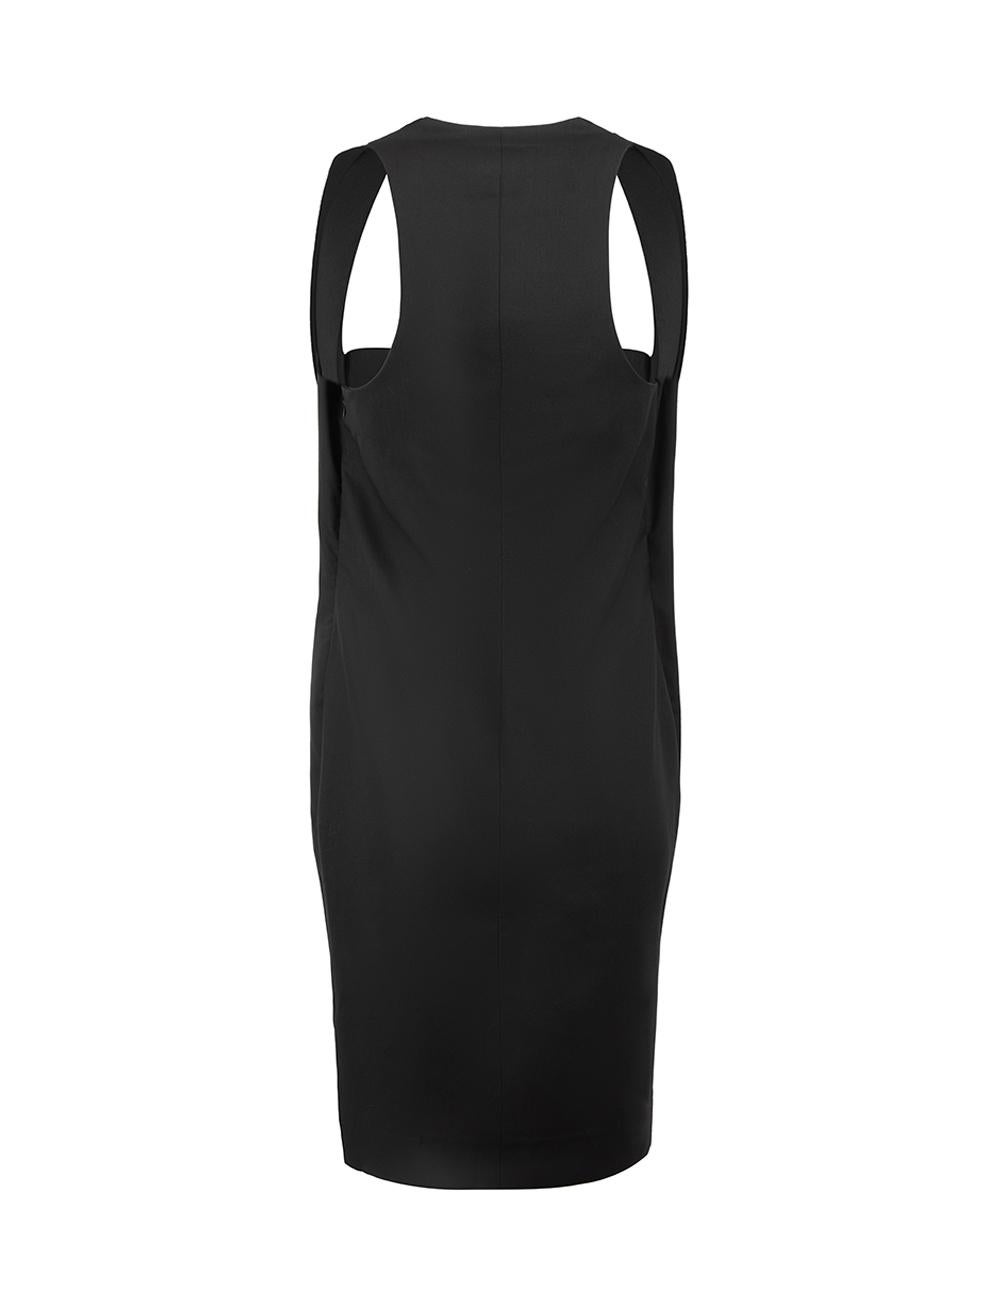 Balenciaga Black Wool Sleeveless Body-con Dress Size L In Good Condition For Sale In London, GB